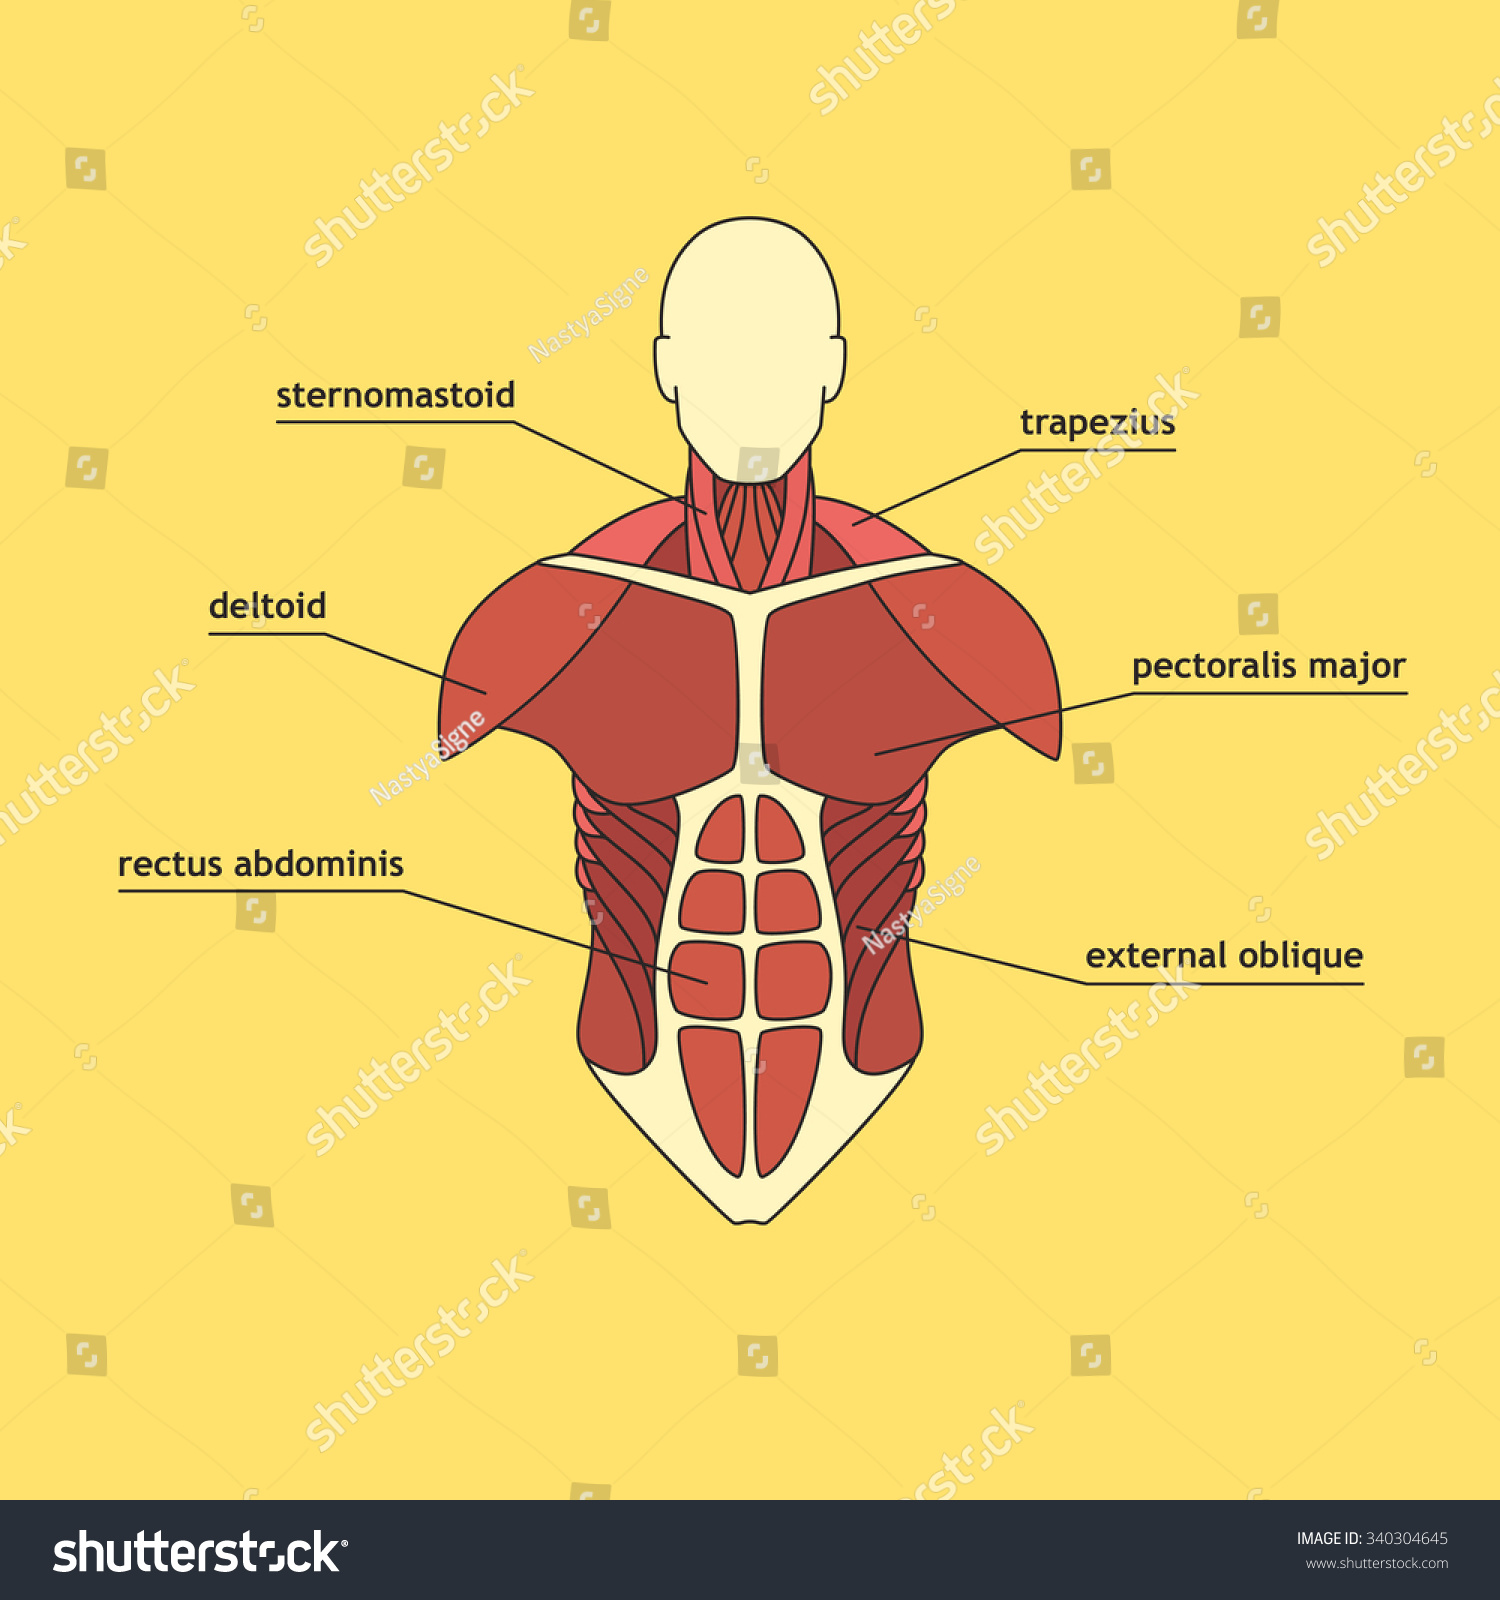 Muscles Of Thorax. Vector Illustration Of Muscle System. - 340304645